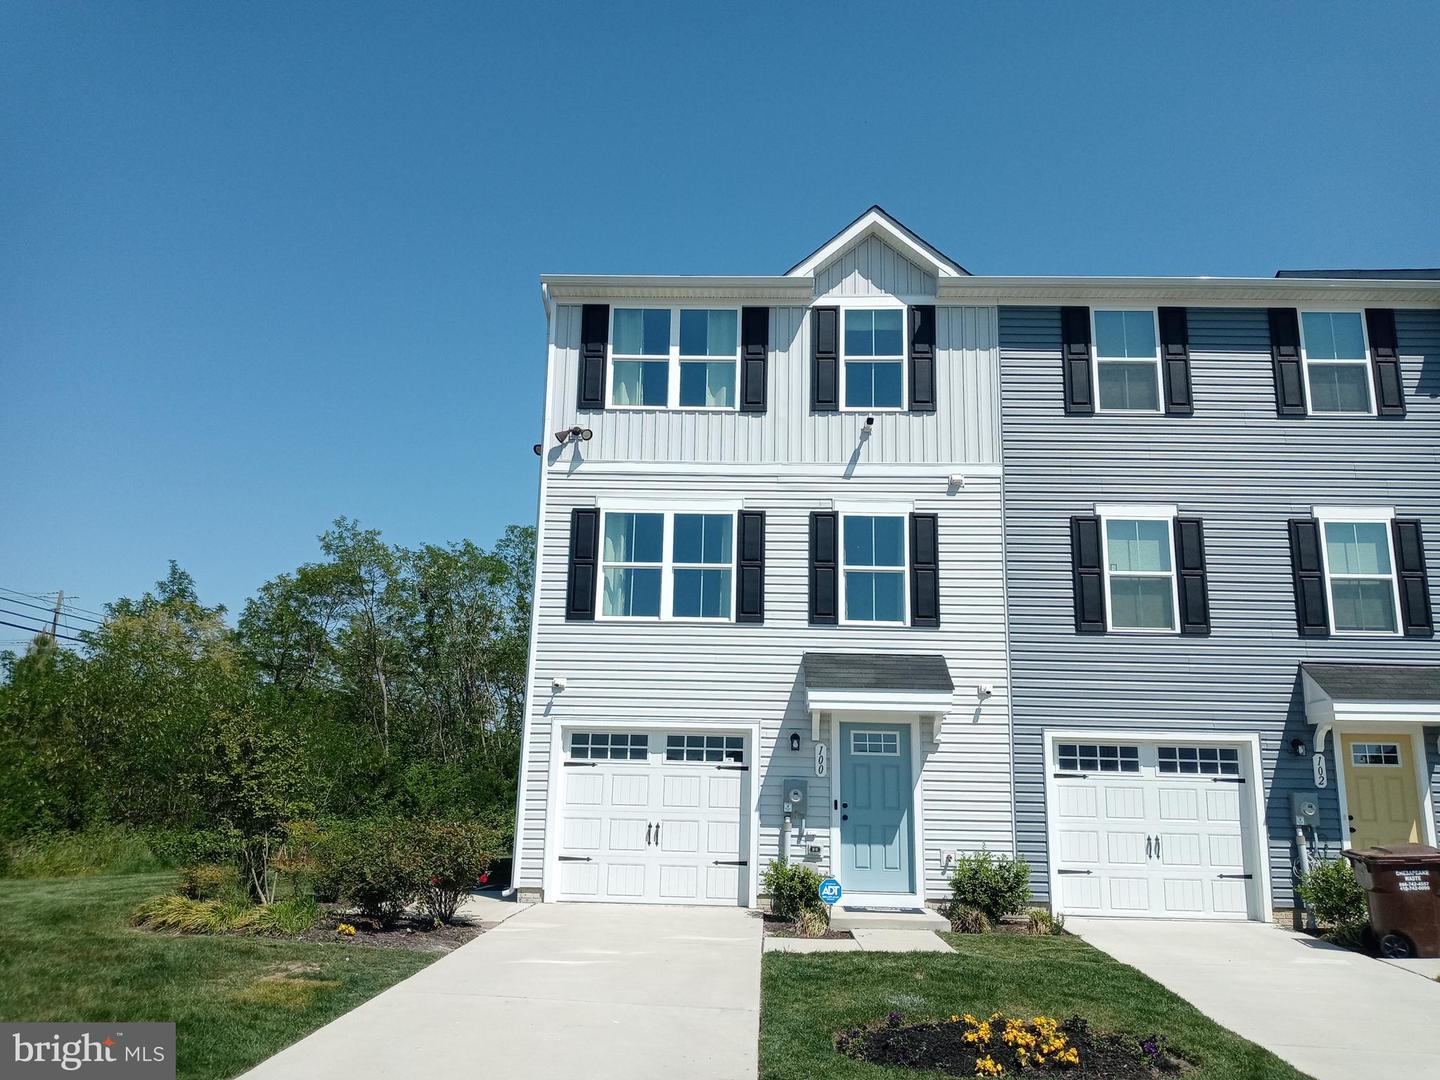 View Cambridge, MD 21613 townhome